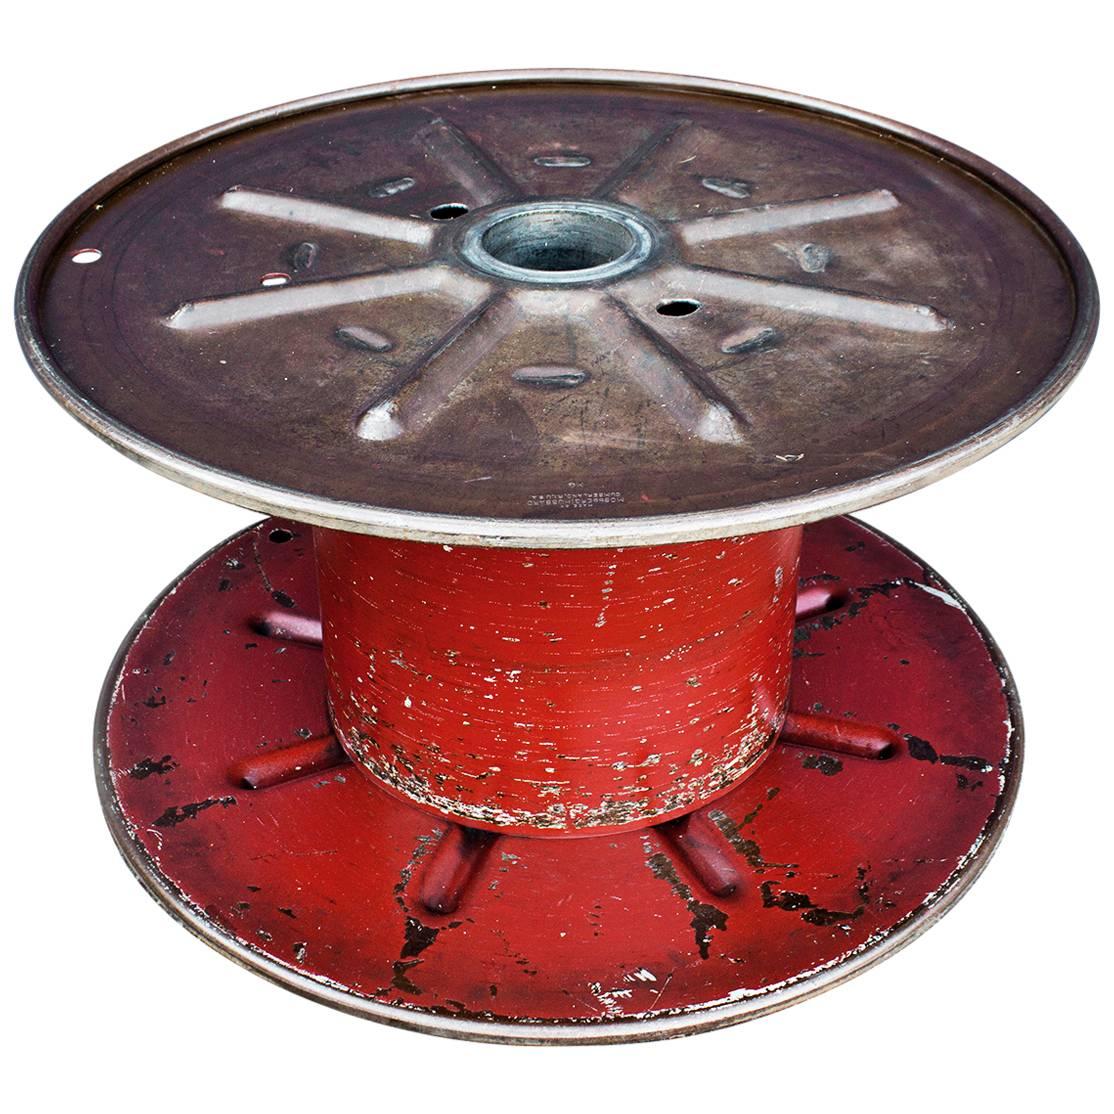 Vintage Steel Cable Spool Bright Red, circa 1960s